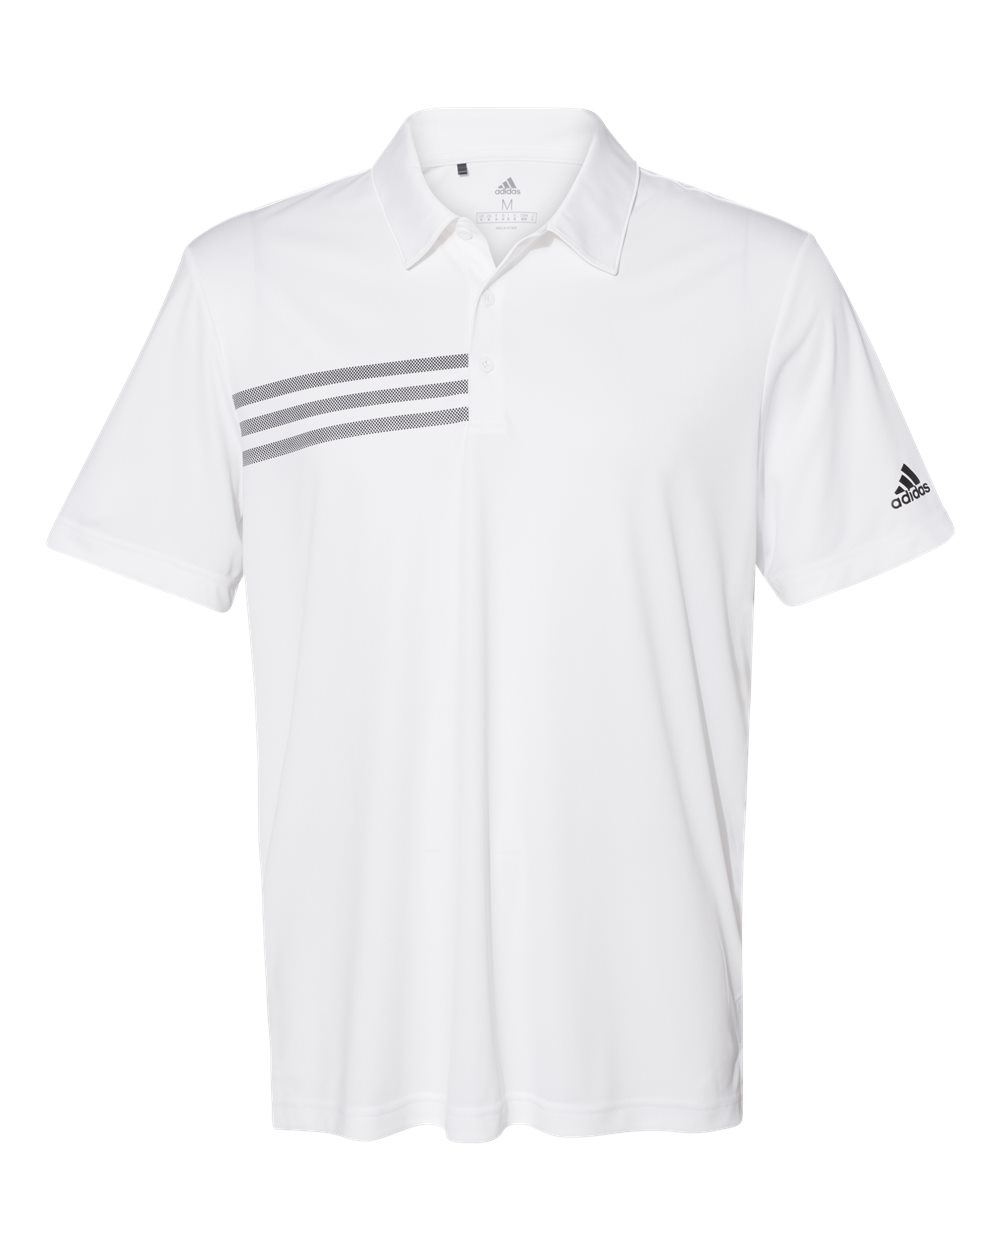 Picture of Adidas 3-Stripes Chest Polo